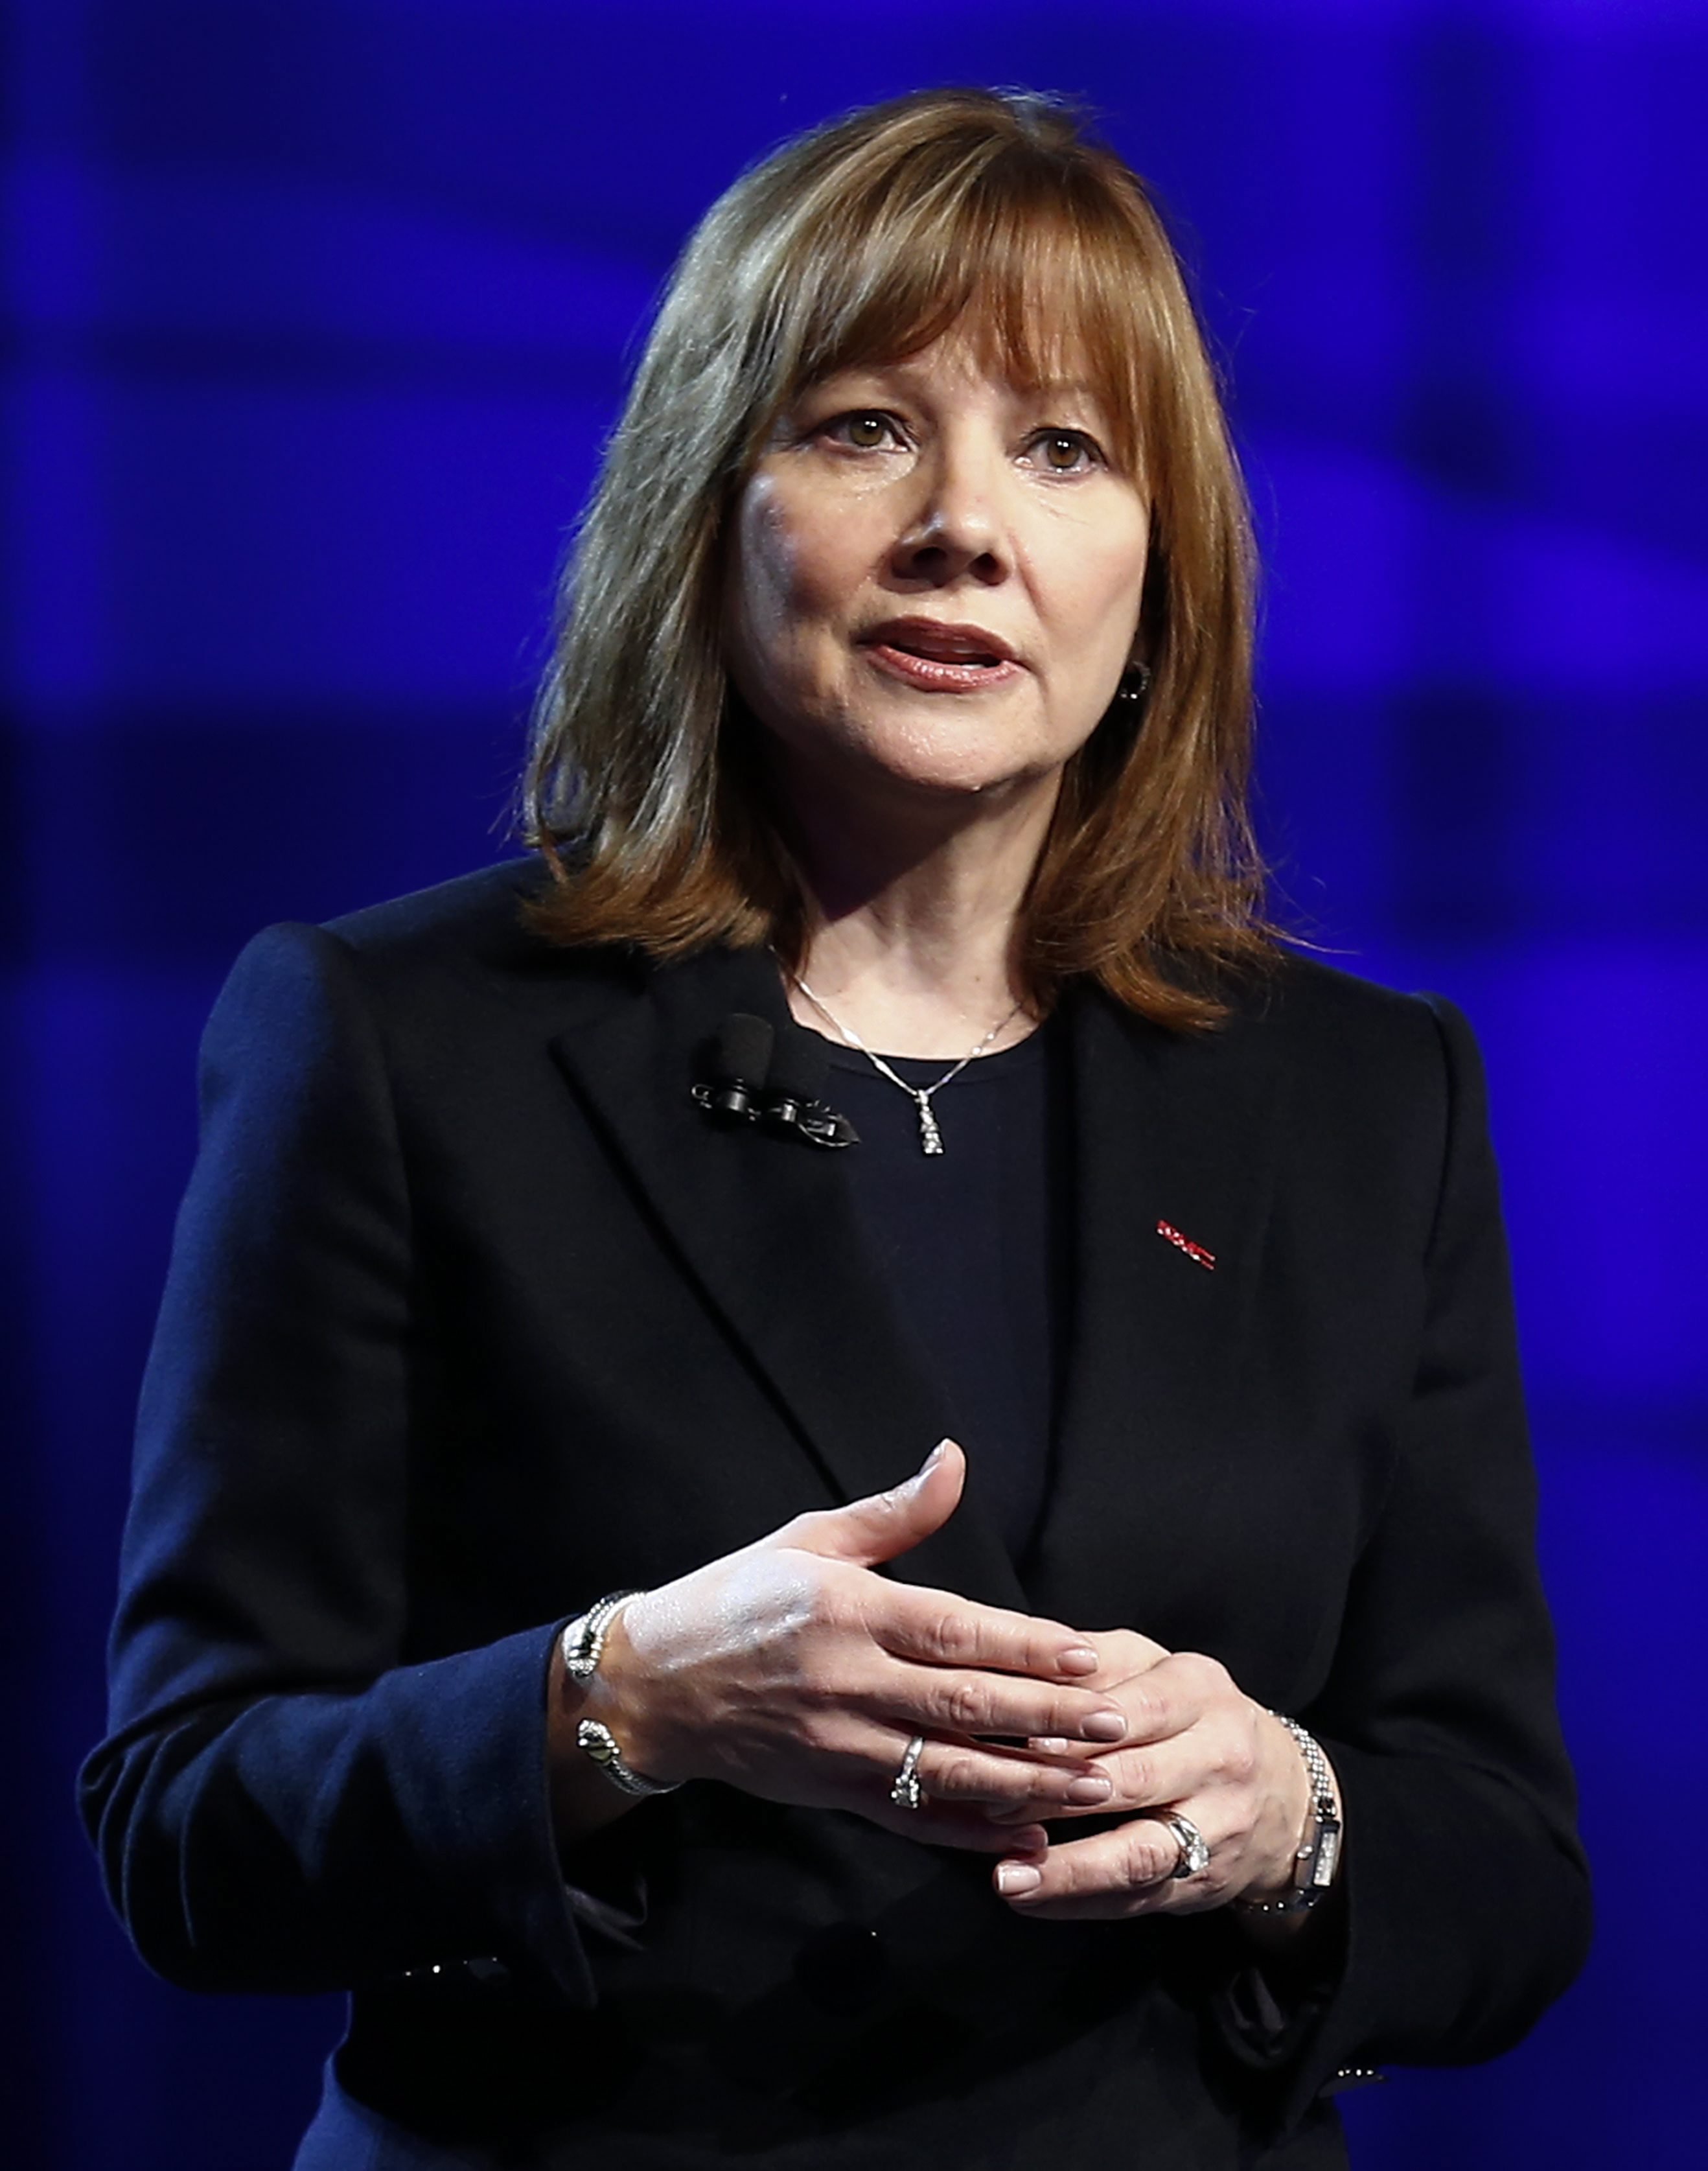 General Motors CEO Mary Barra introduces the 2015 GMC Canyon pick-up truck at the Russell Industrial Center in Detroit, on Jan. 12, 2014. (Tannen Maury—EPA)